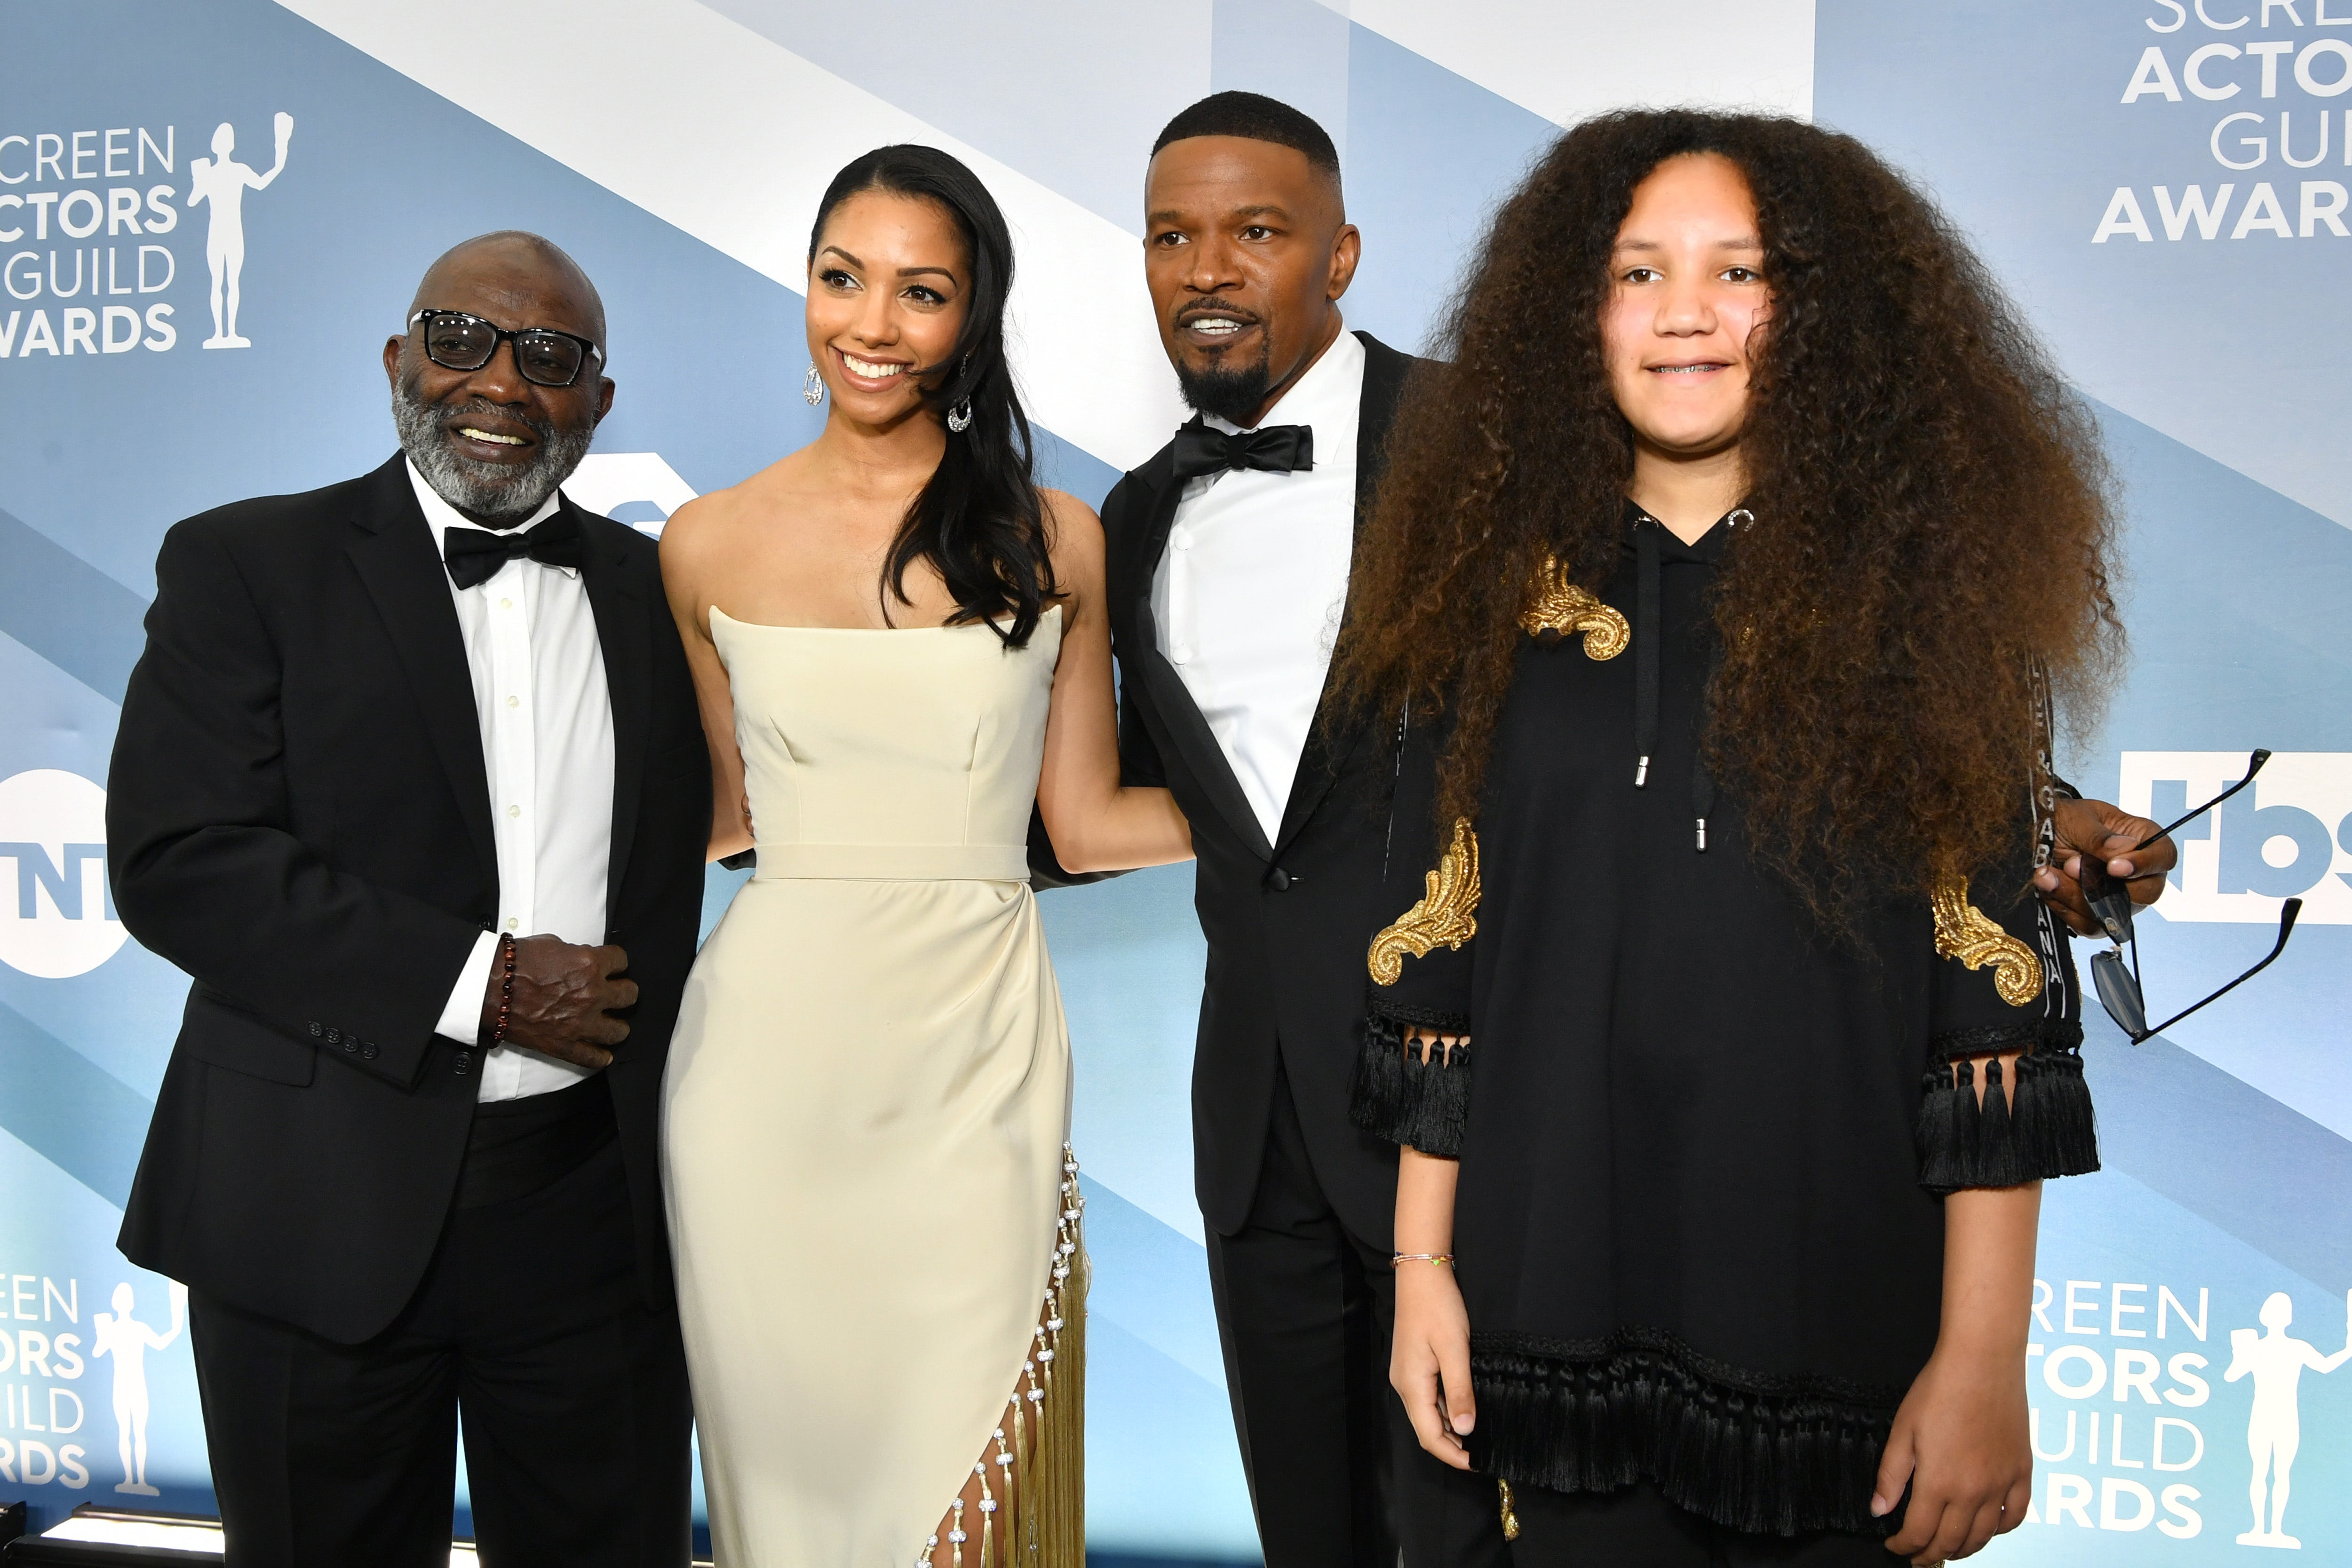 Left to right, George Dixon, Corinne Foxx, Jamie Foxx, and Anelise Bishop pose together